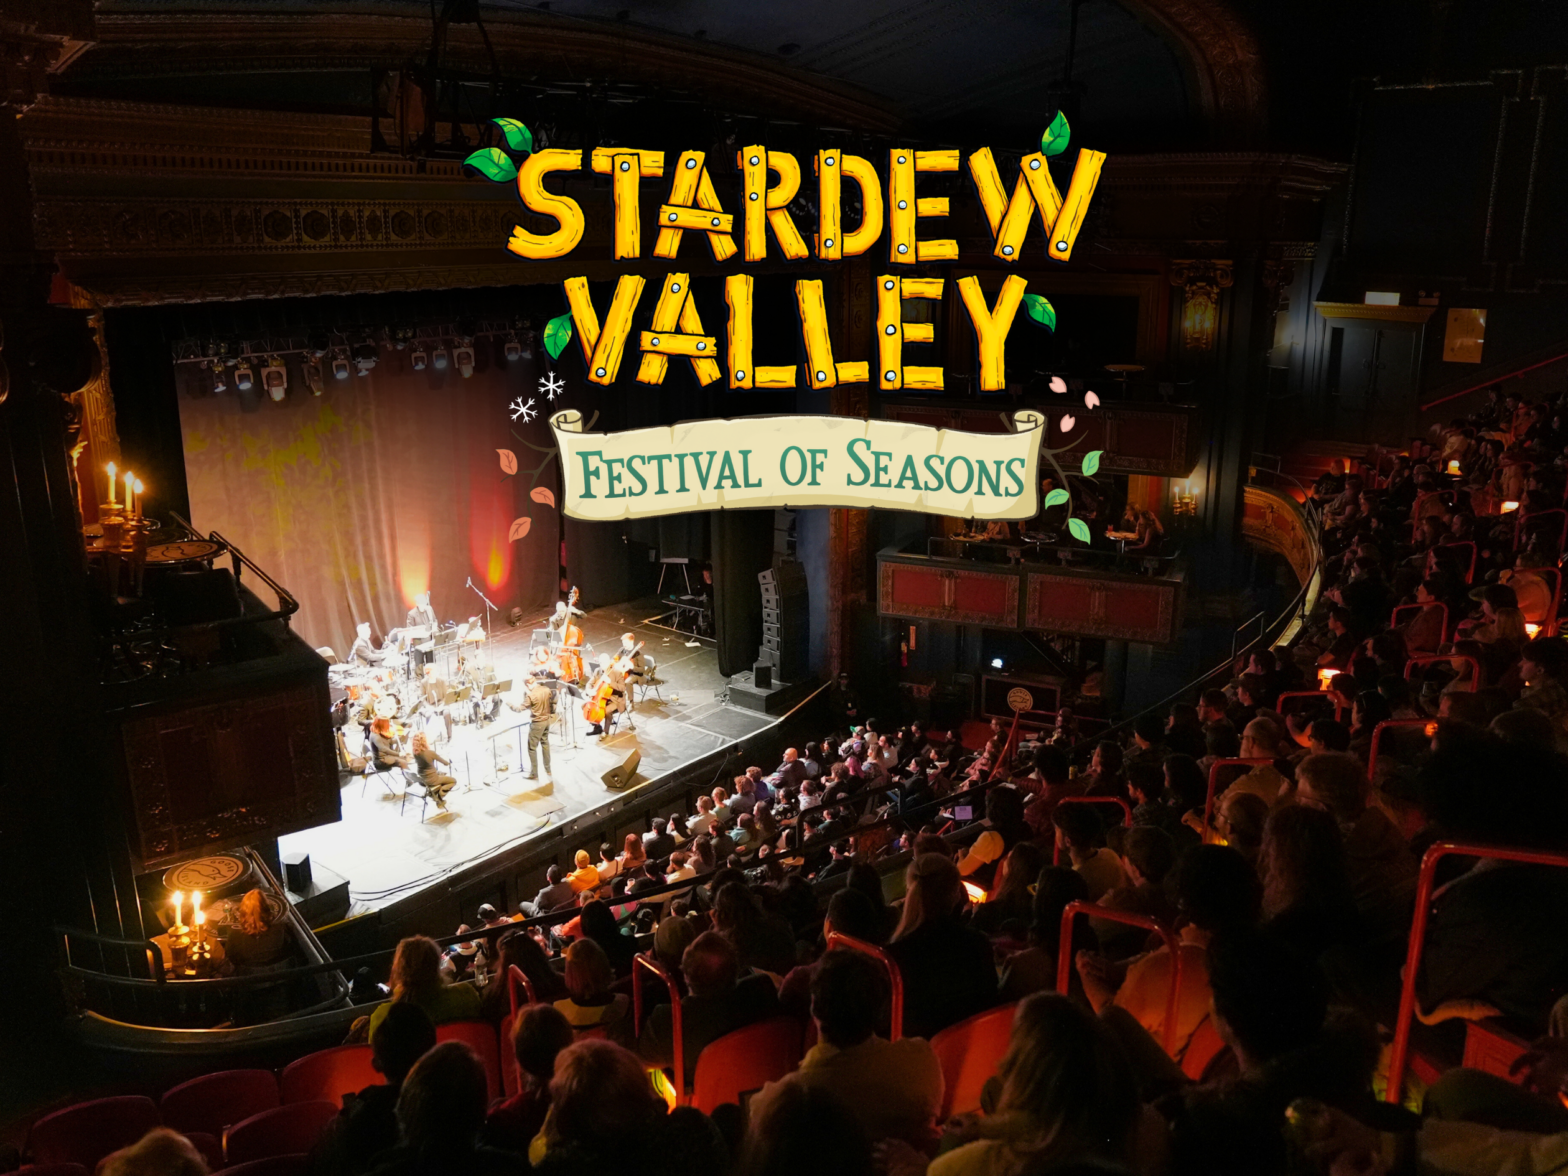 Featured image for post: Stardew Valley: Festival of Seasons Concert Recap